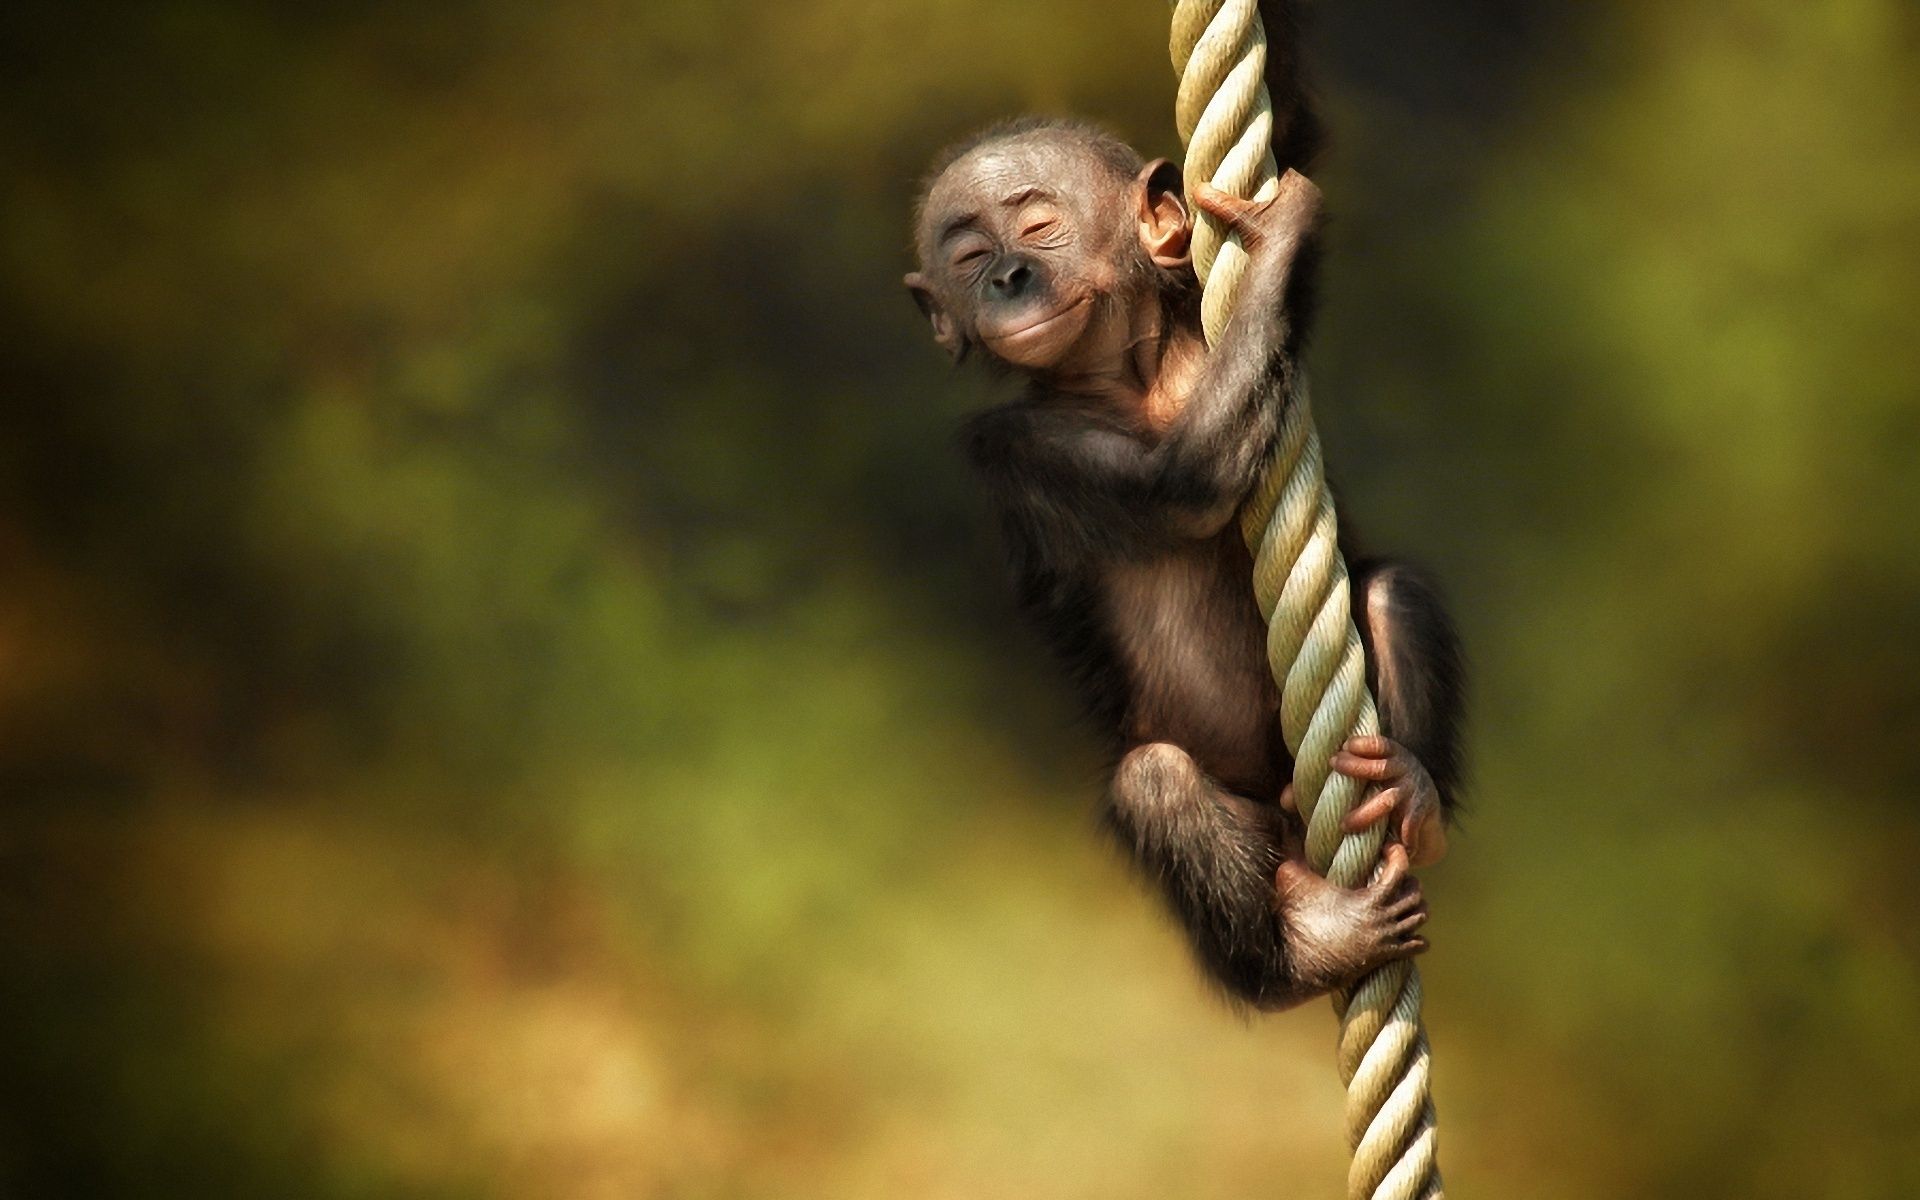 Monkey Wallpaper Full HD Pictures